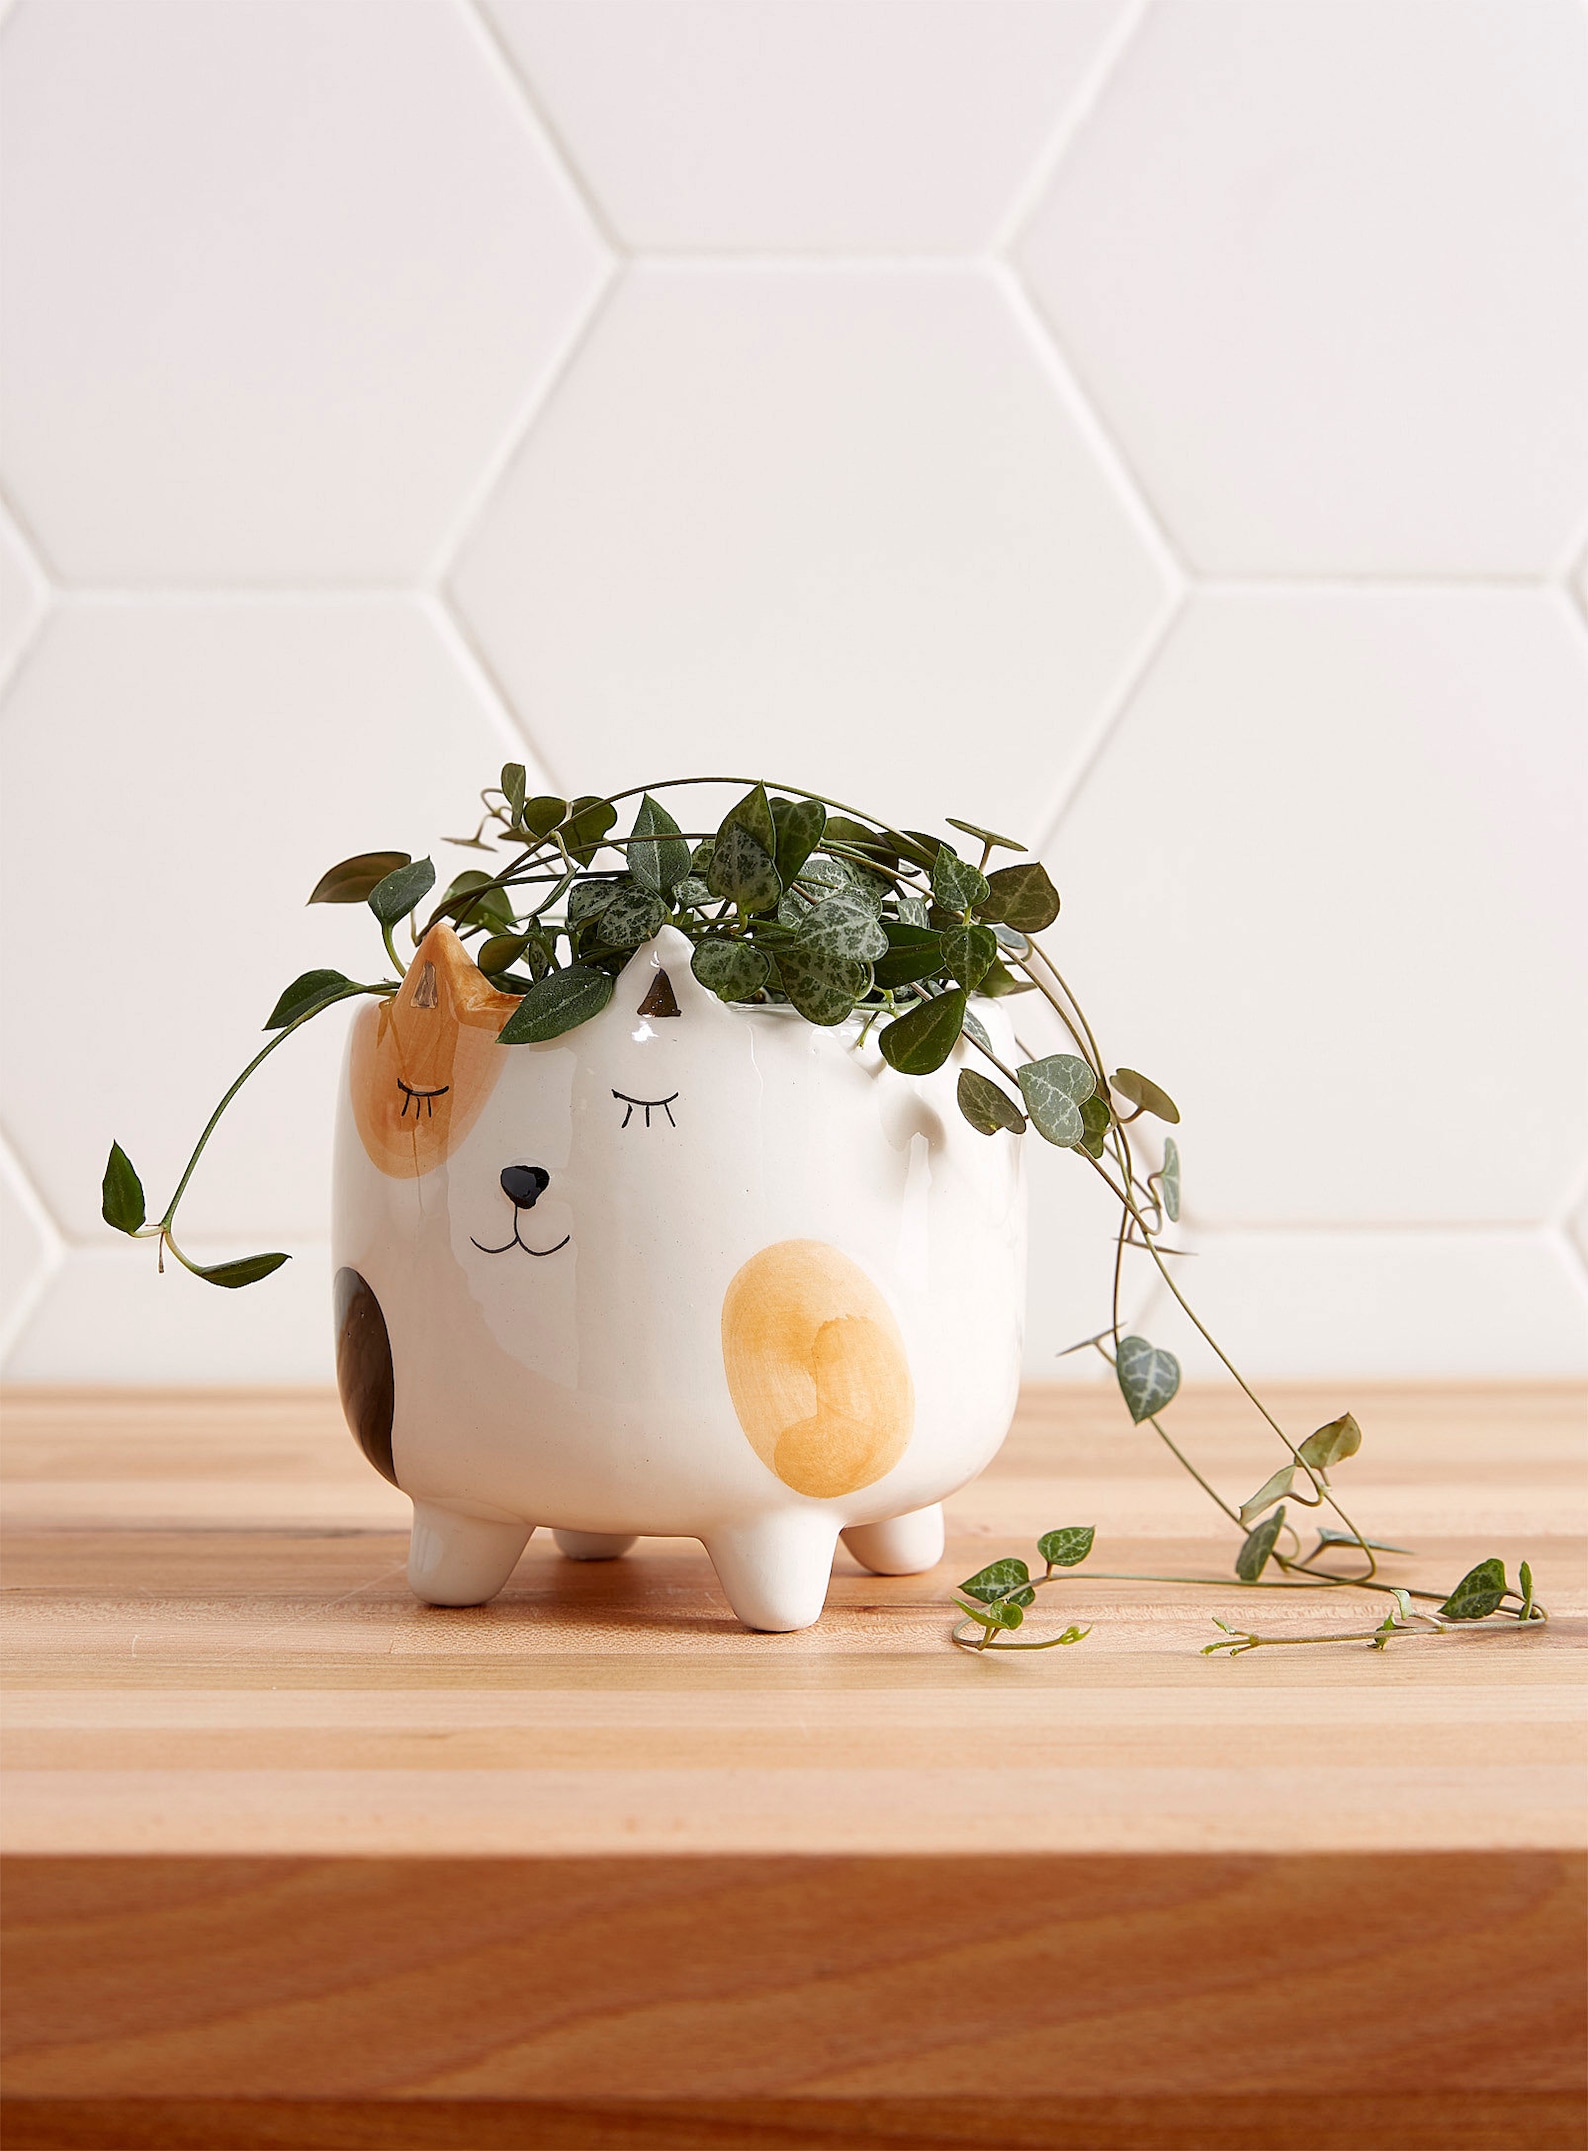 Calico Cat Planter for Succulents and Small Plants